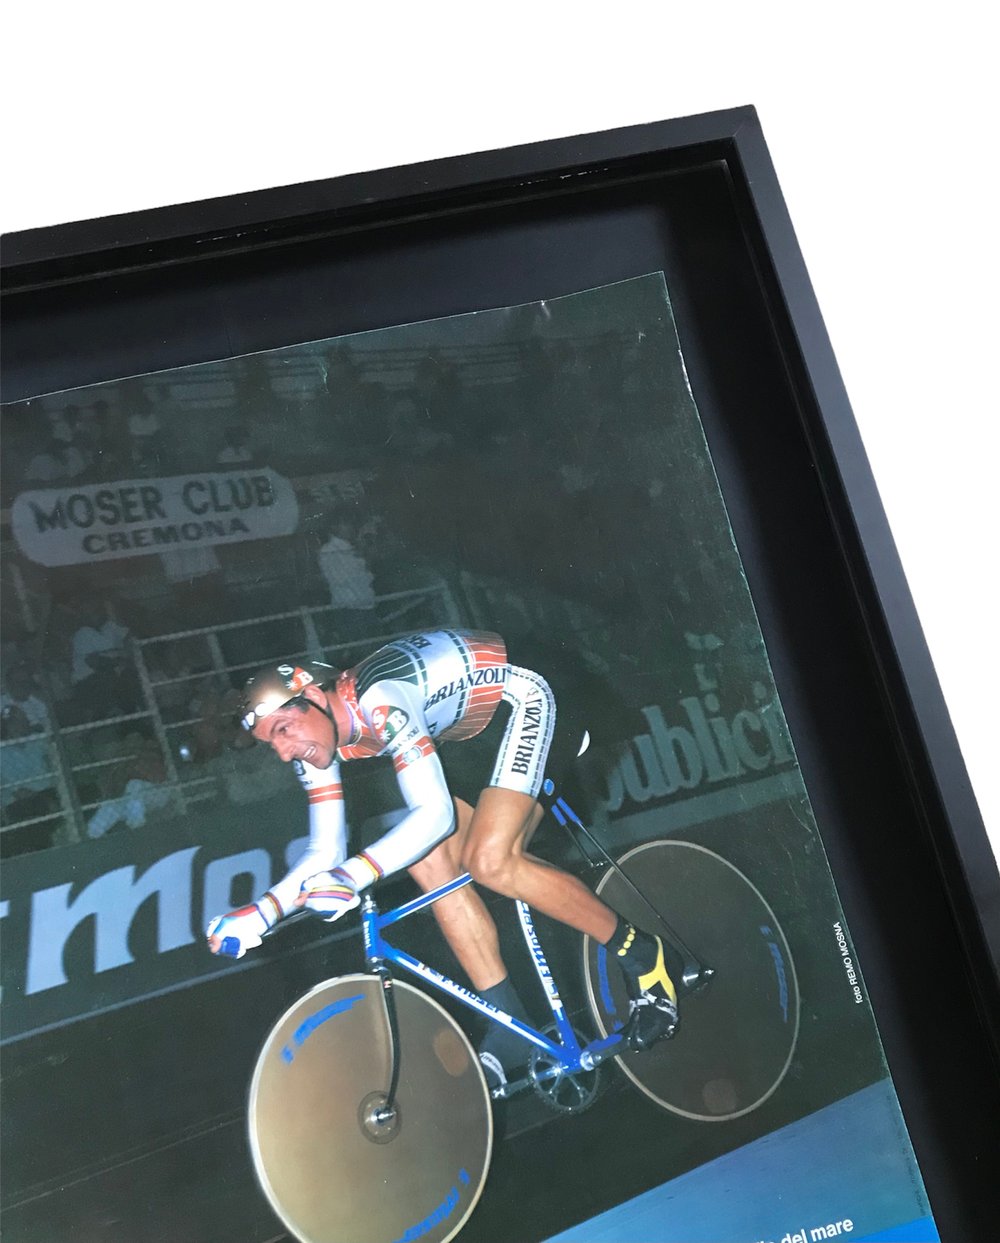 Advertising poster of Francesco Moser by Cicli Moser